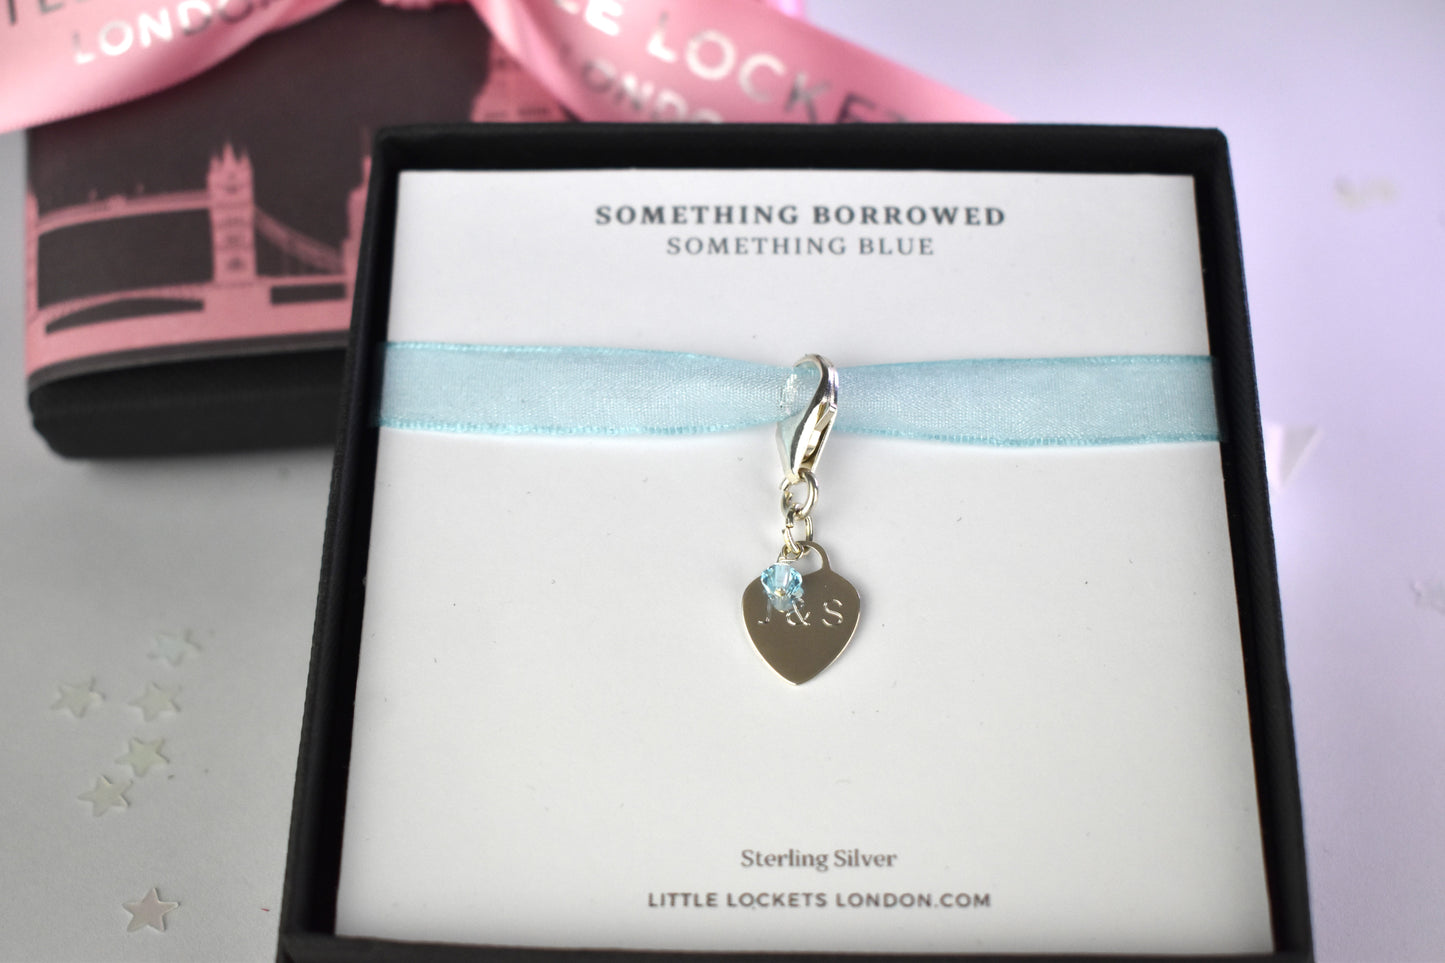 Sterling silver engraved heart and trigger clasp with tiny blue crystal shown gift boxed with card "Something borrowed, Something Blue". Optional luxury gift wrapping is shown in background. 